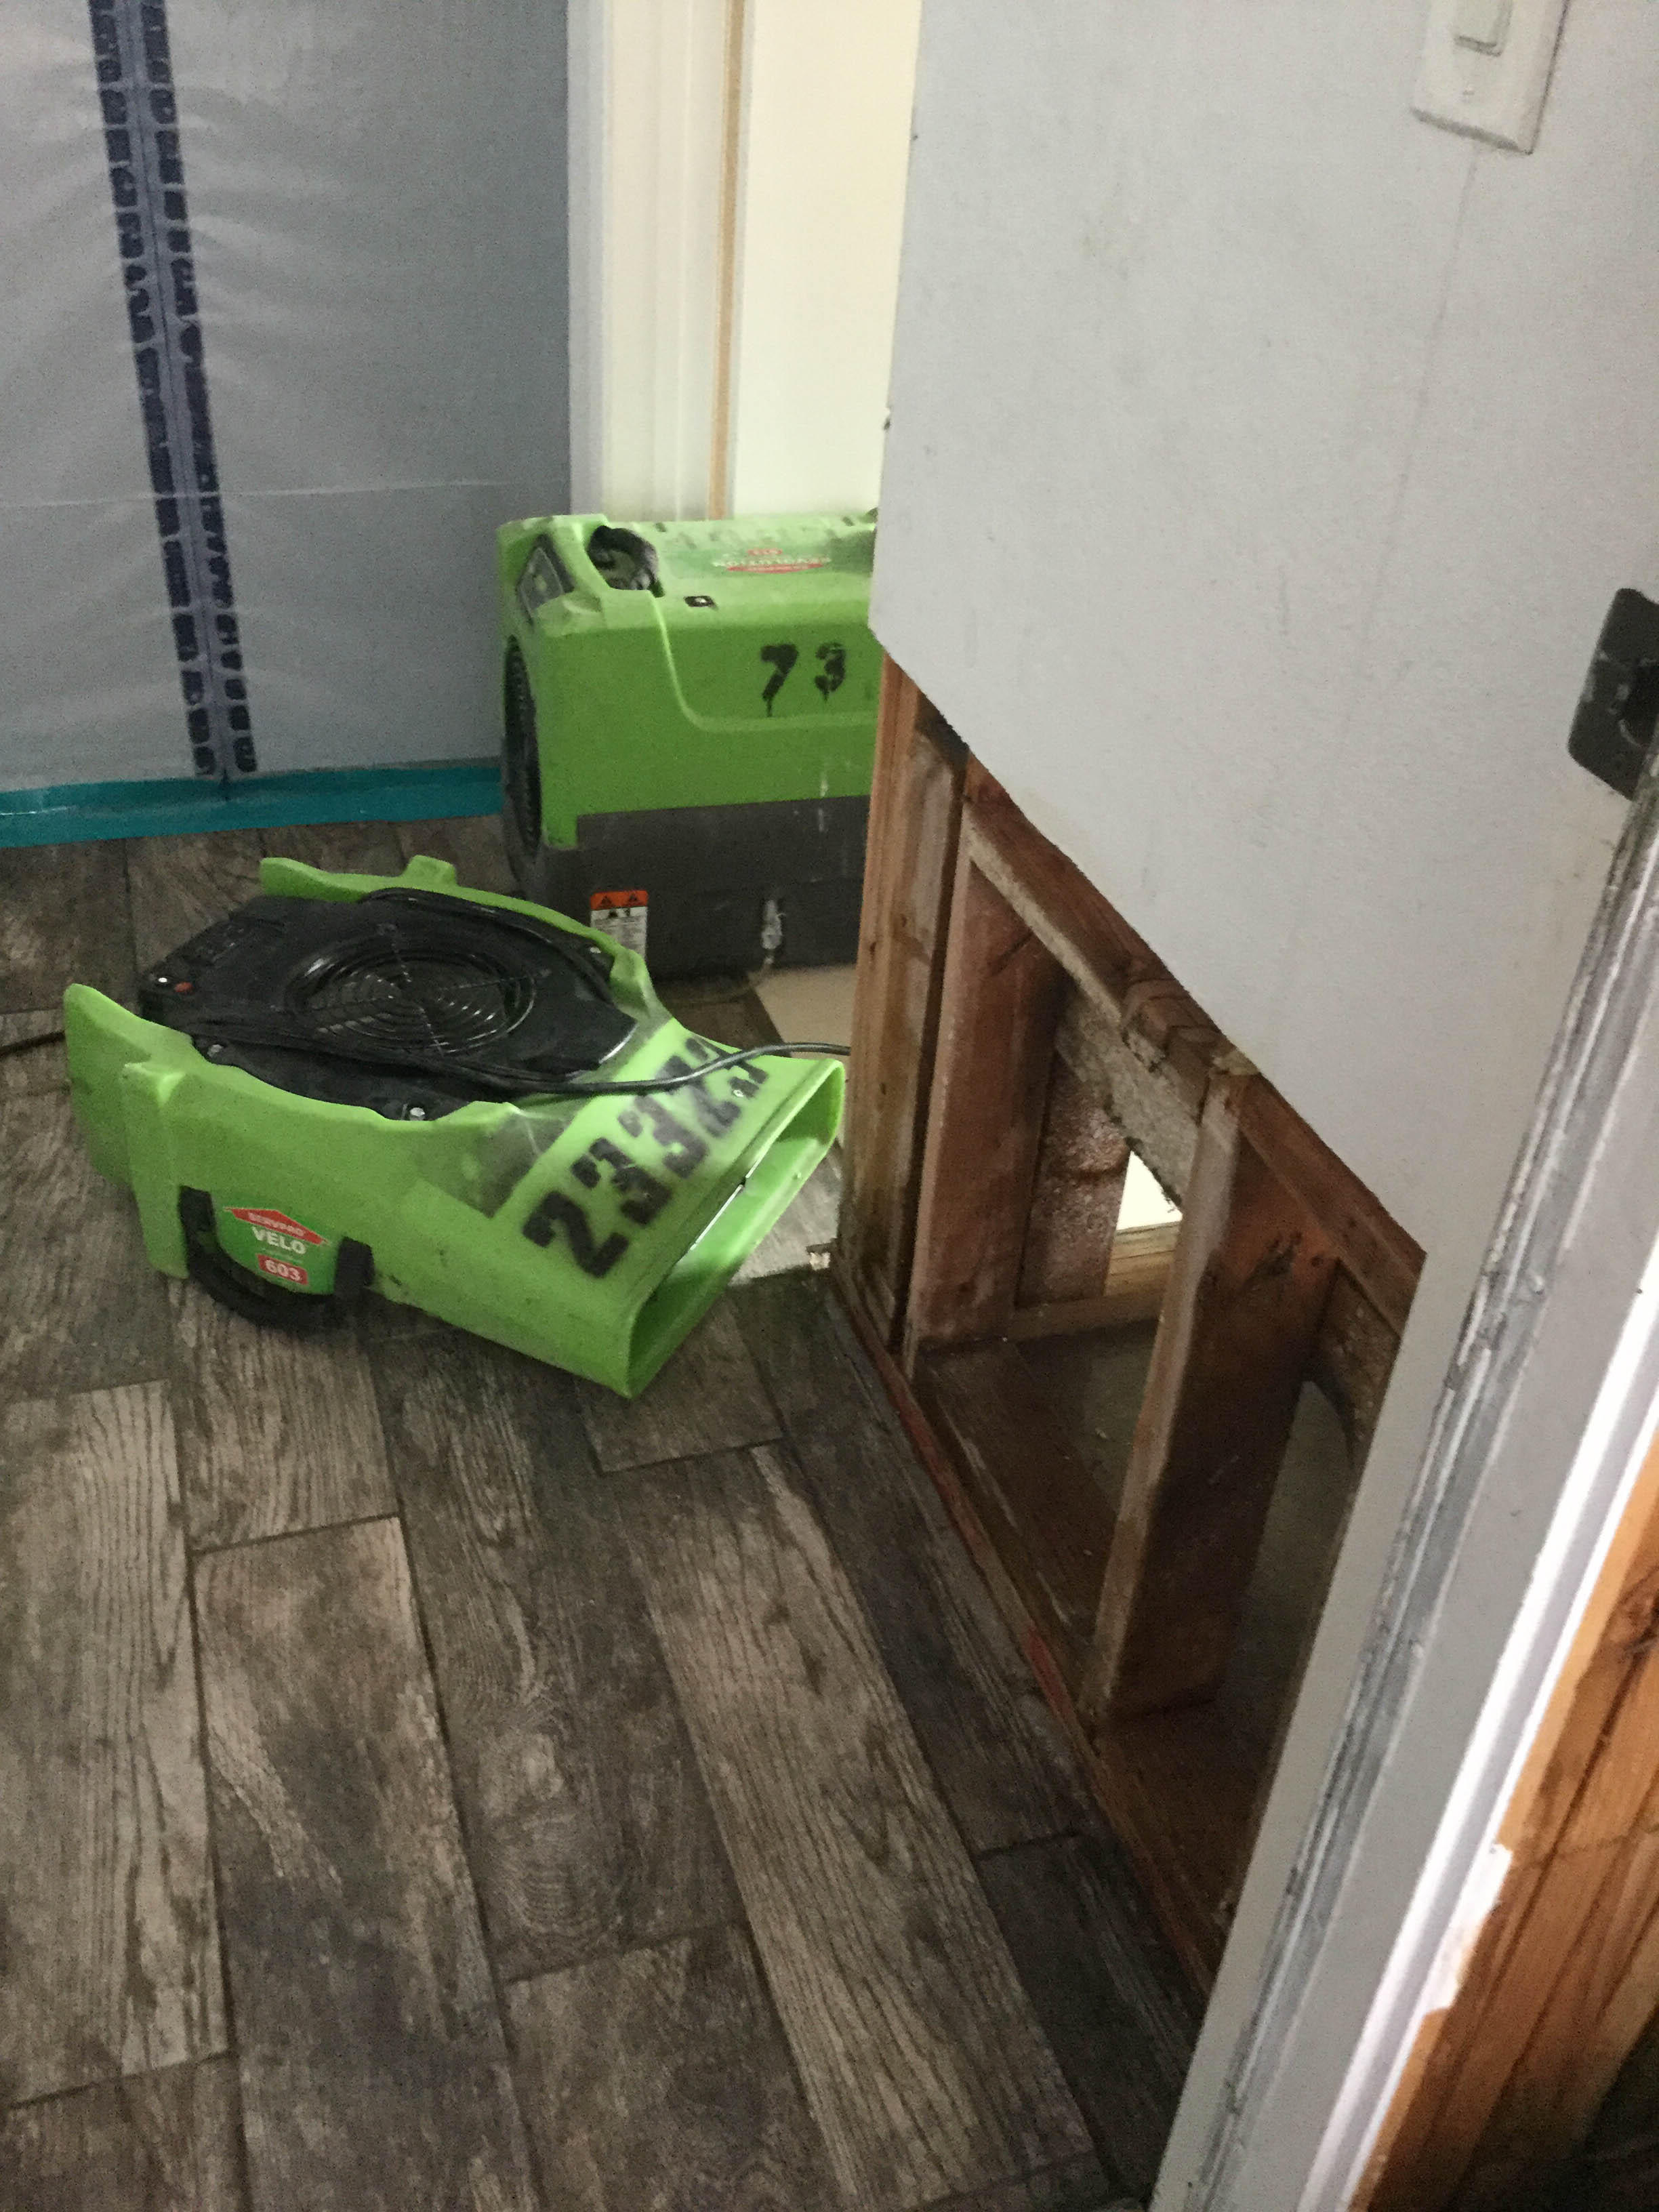 SERVPRO of Anaheim West will swiftly and efficiently restore your residential or commercial property to its pre-loss state. Water damage emergency services are available 24 hours a day, seven days a week.